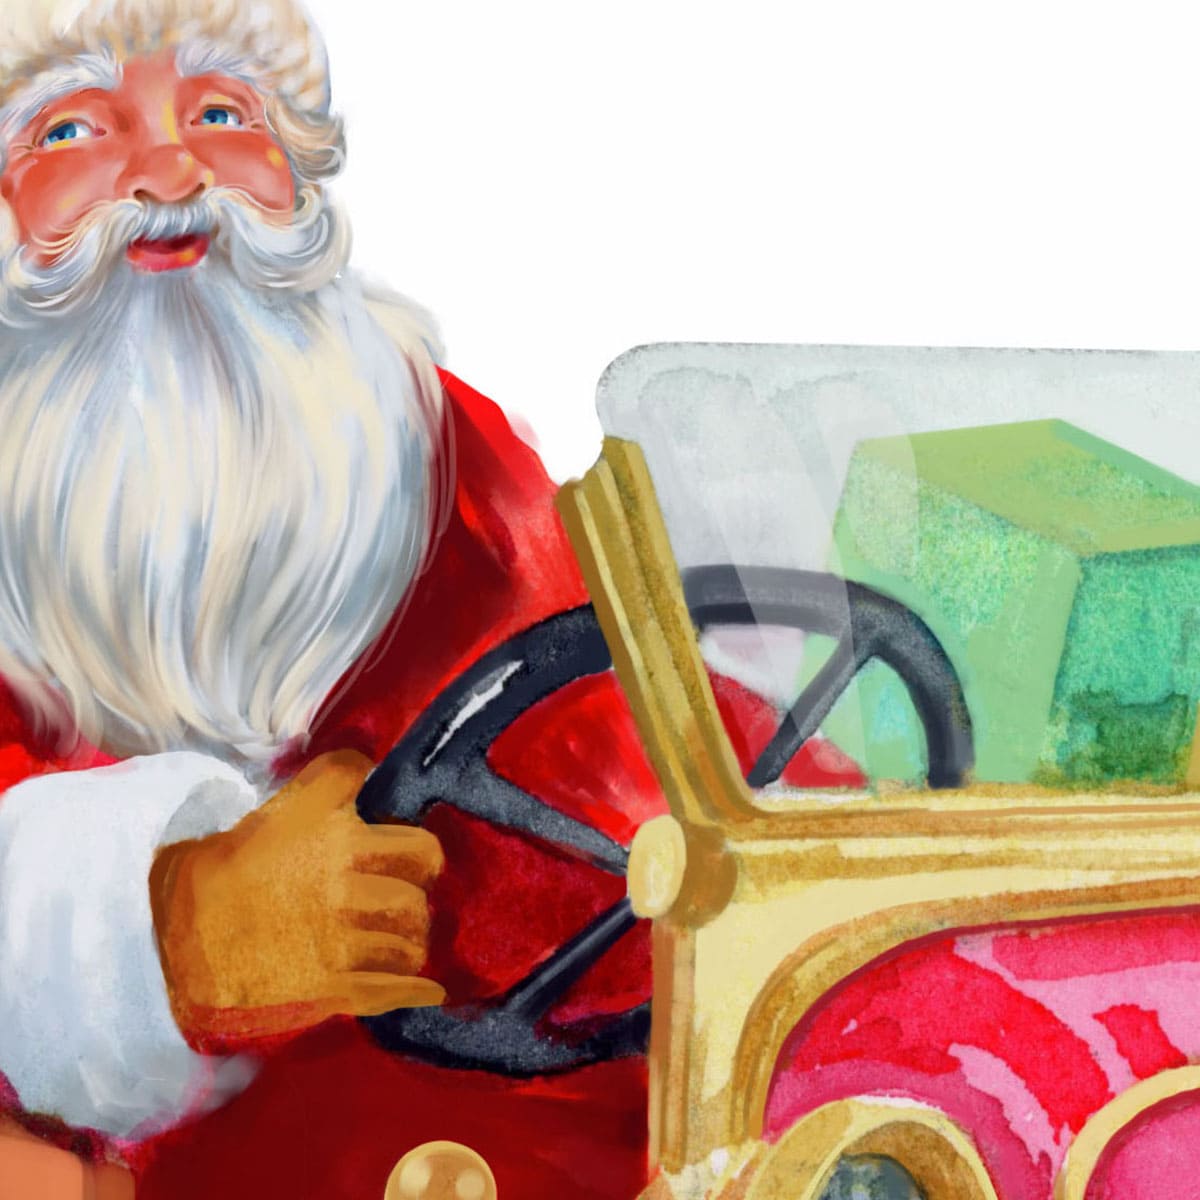 Santa Claus by a red car, fragment of watercolor illustration